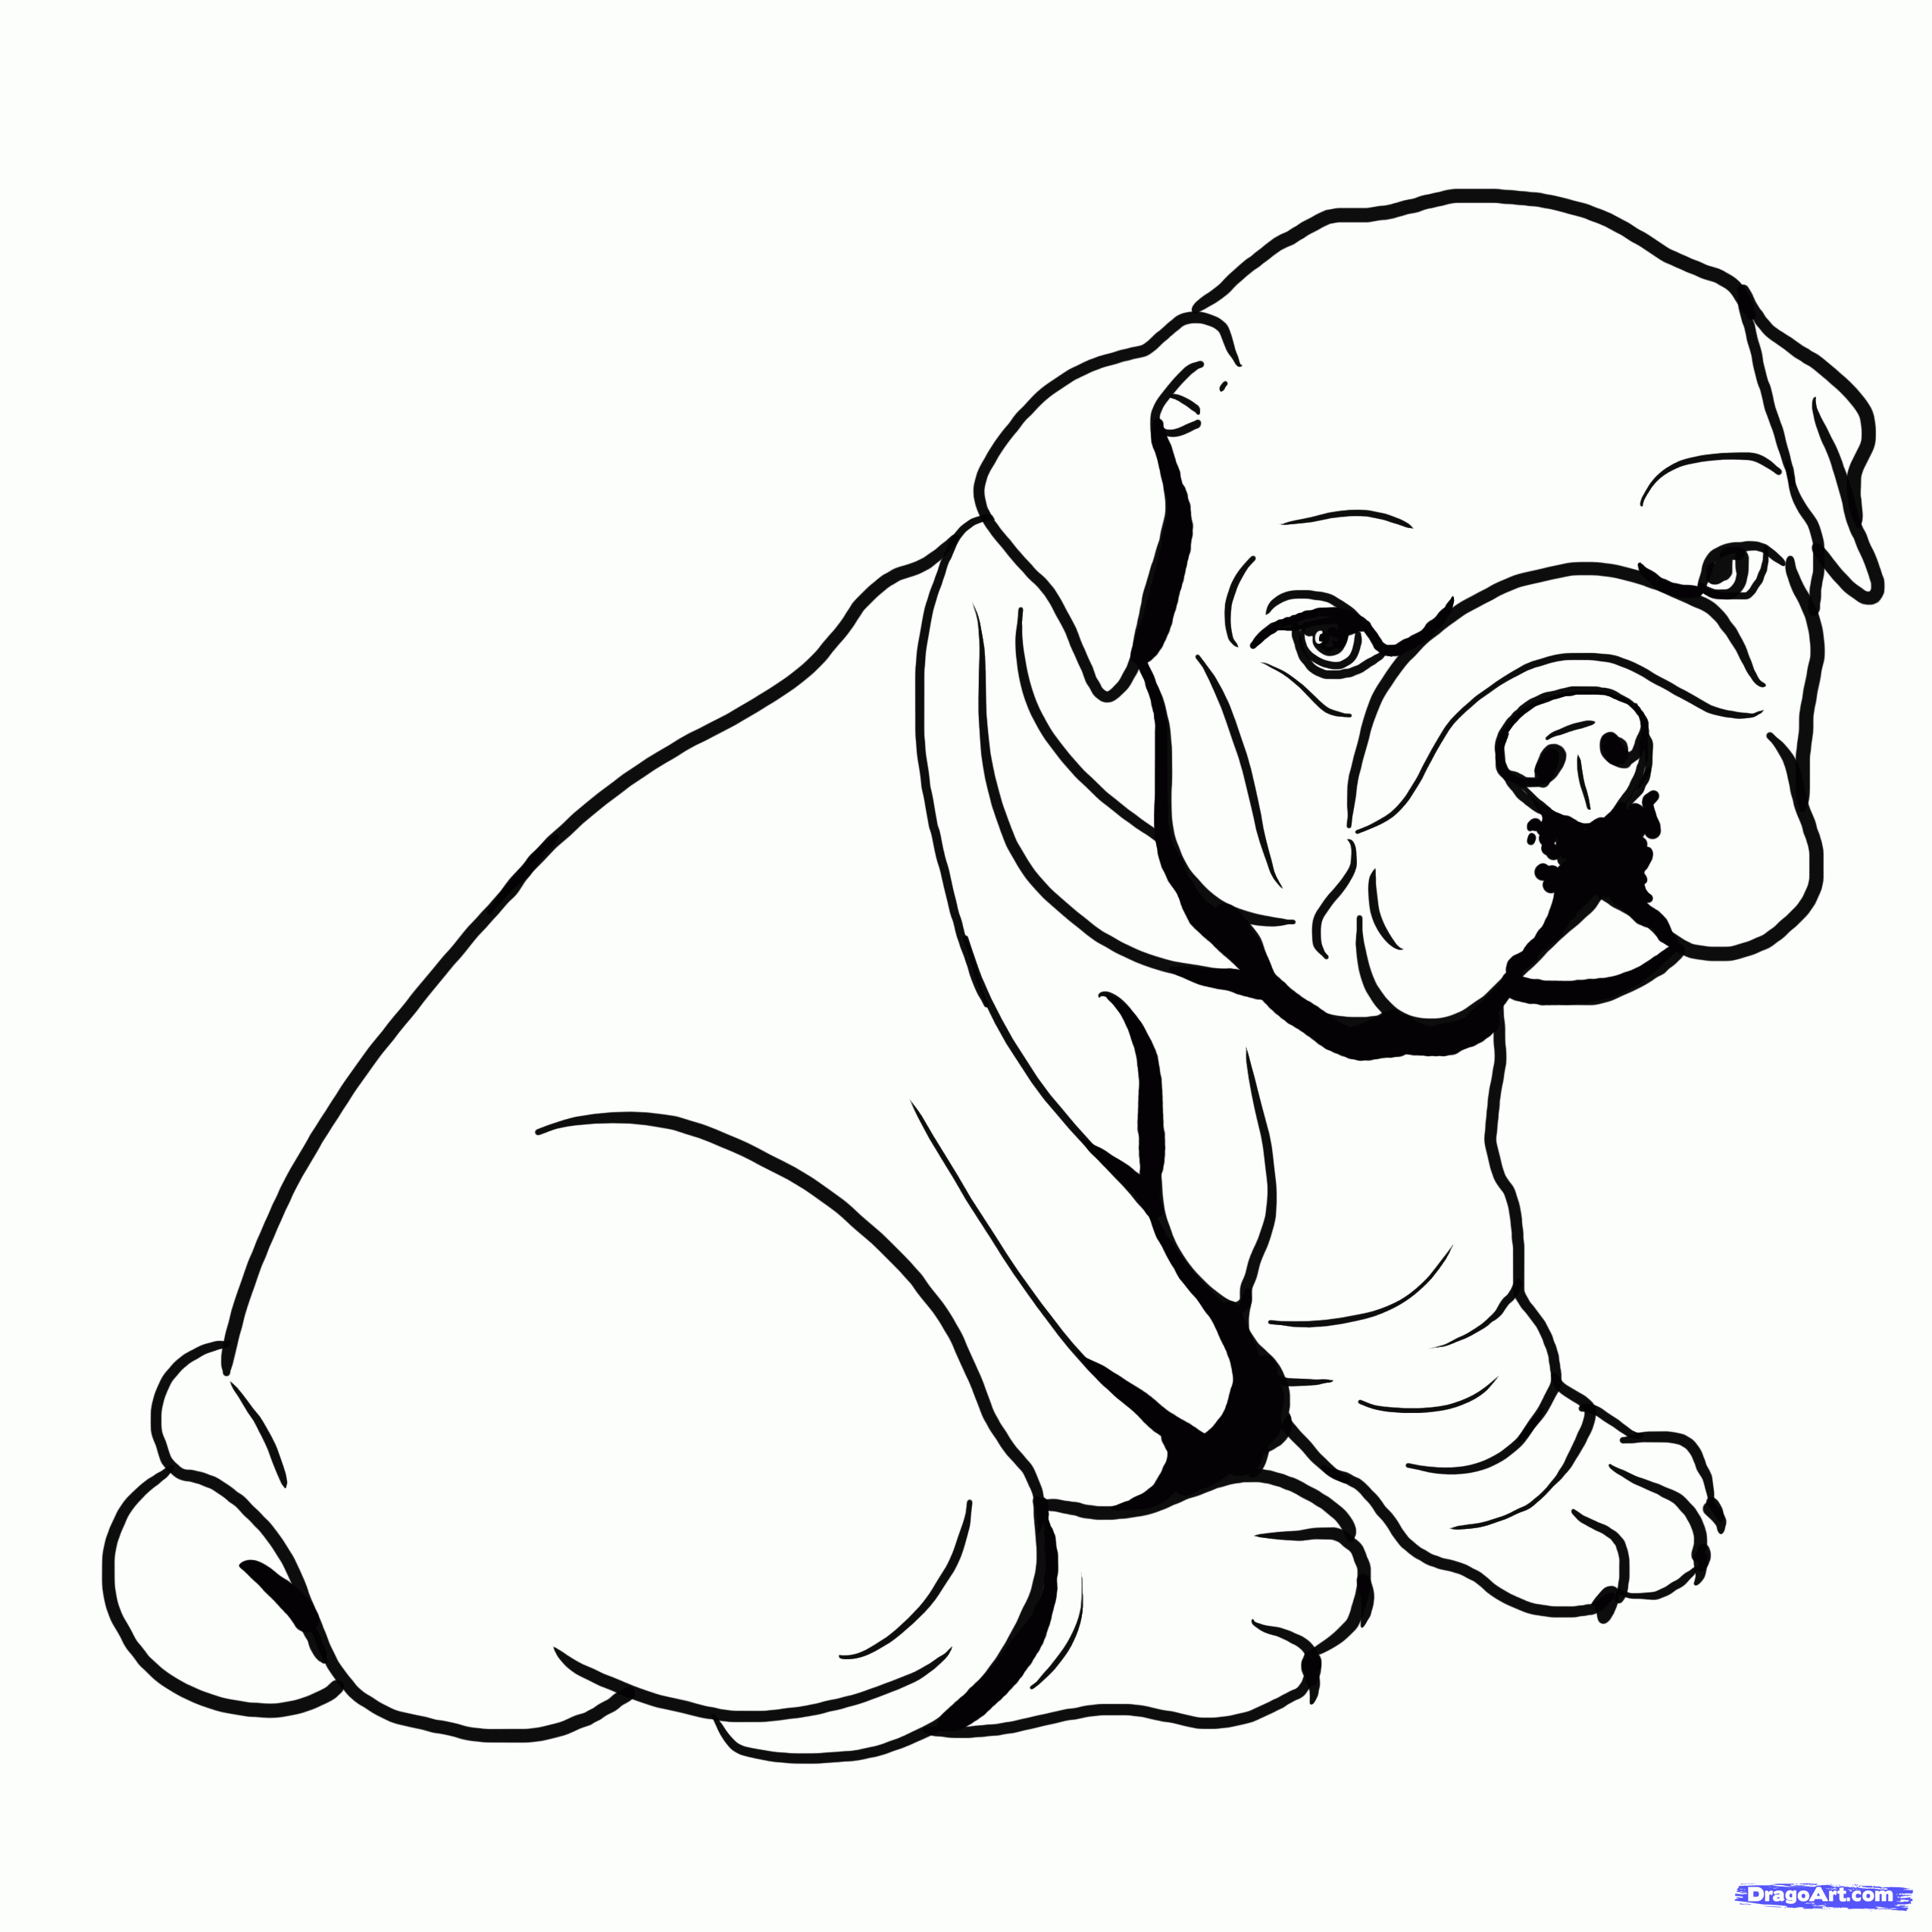 Bulldog Printable - Coloring Pages for Kids and for Adults